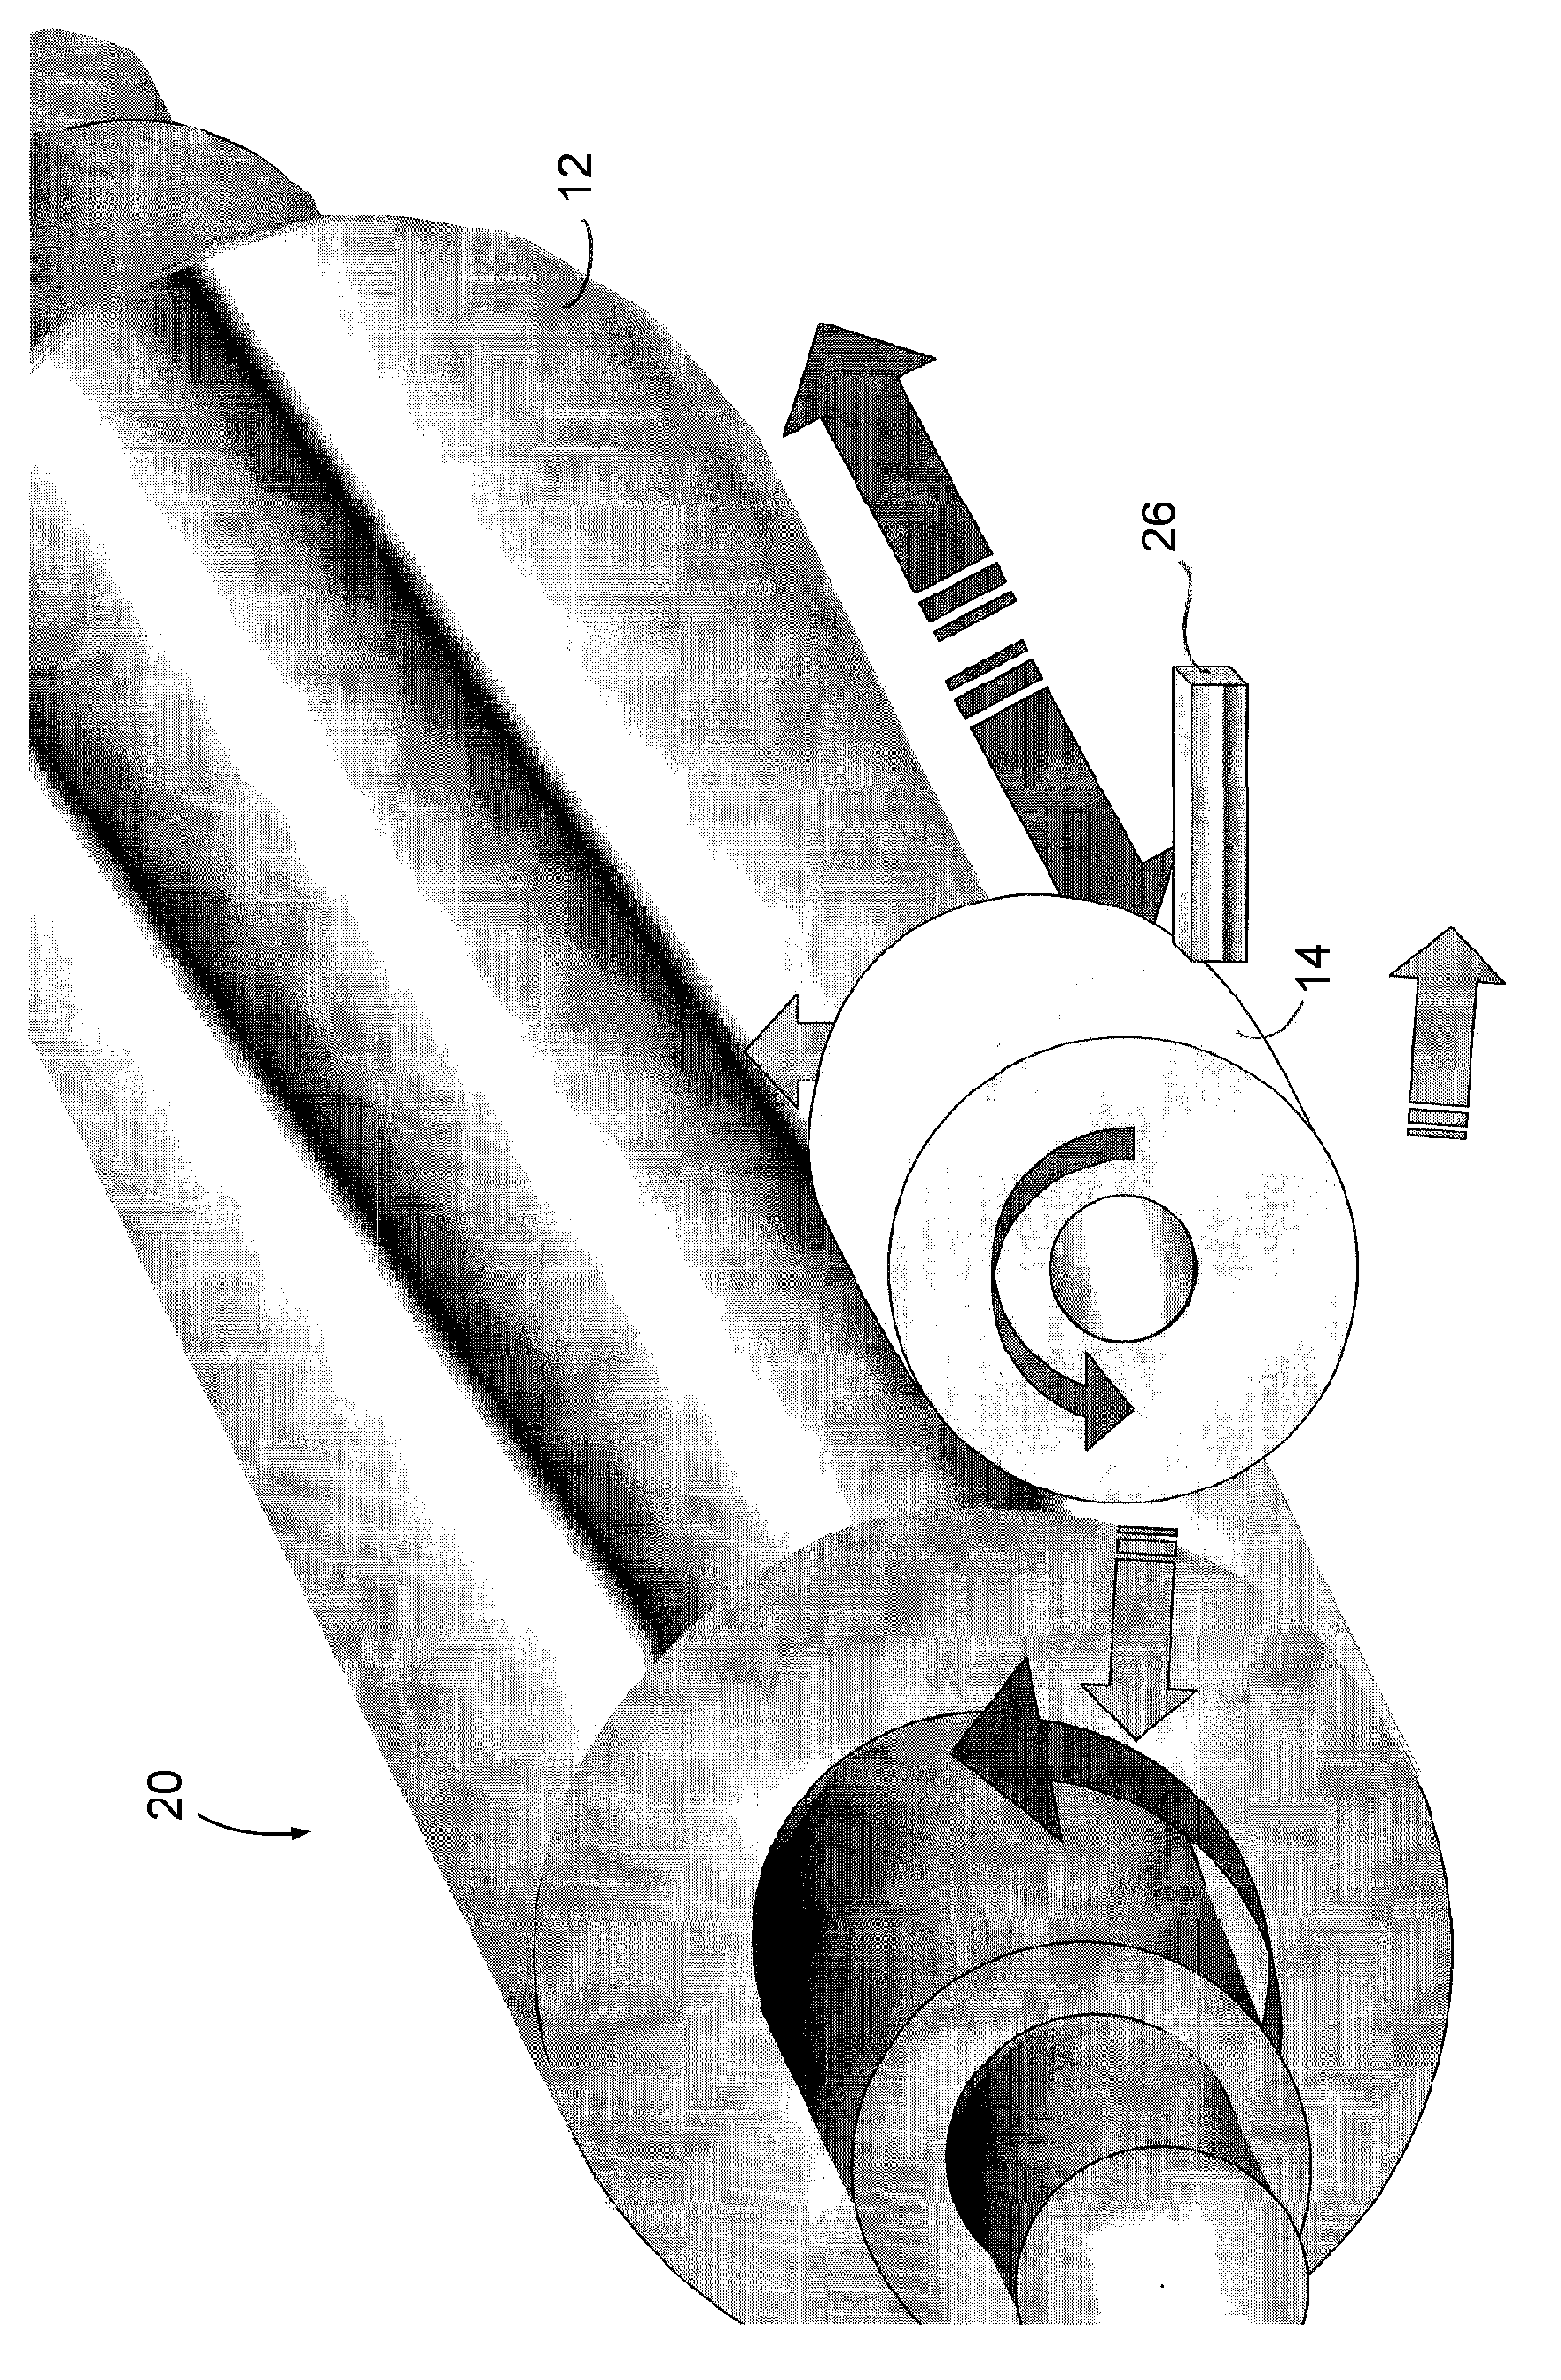 Method and apparatus for roll grinding